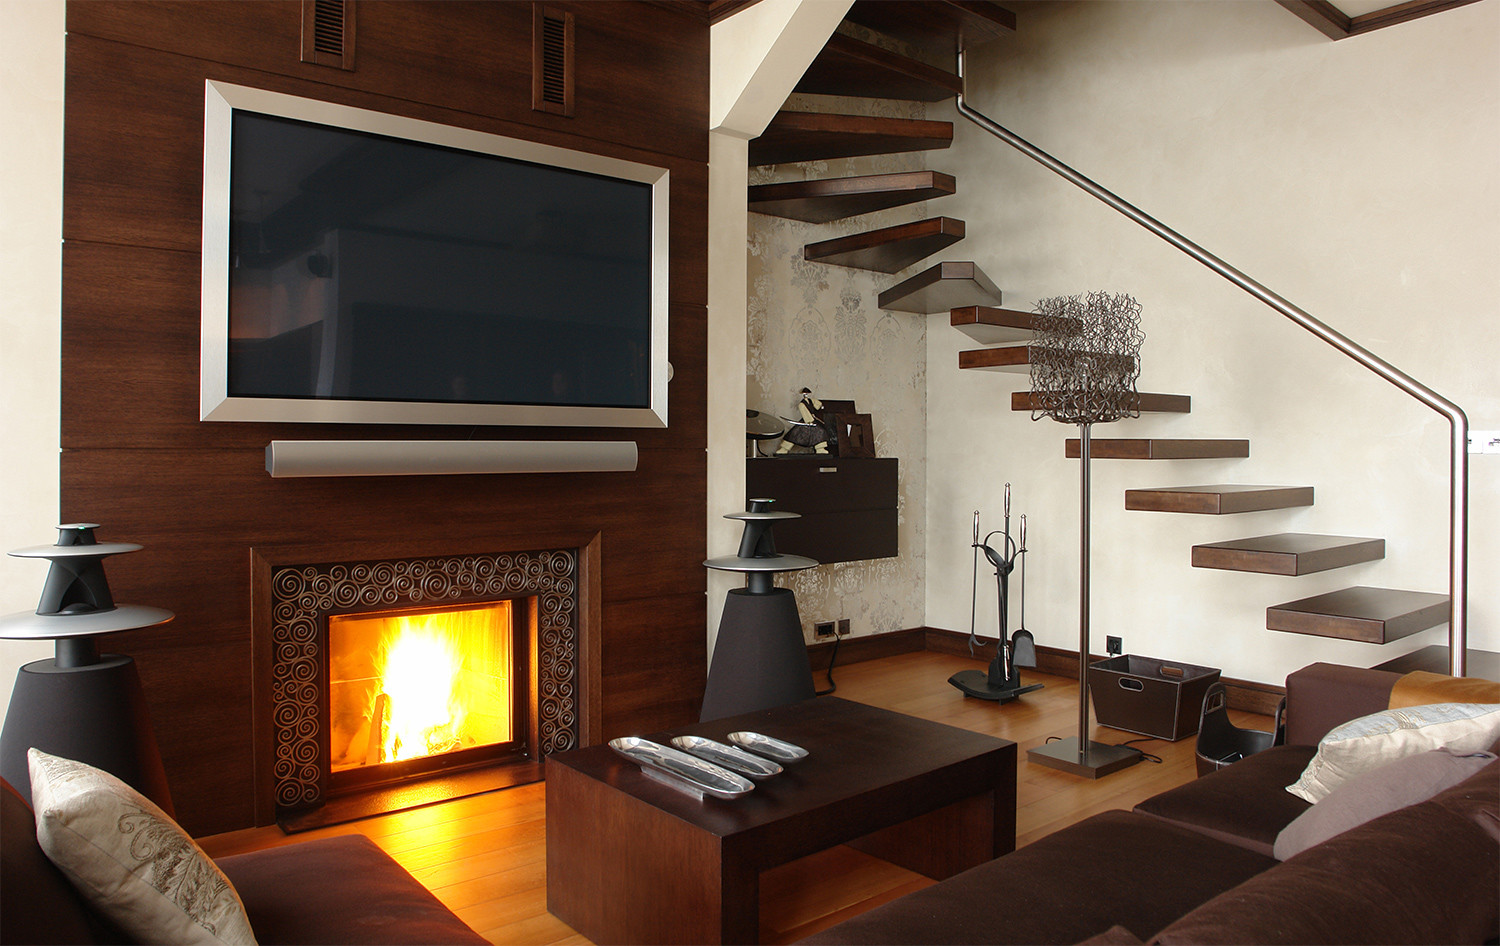 How to prevent wall-mounted TV above fireplace from getting hot